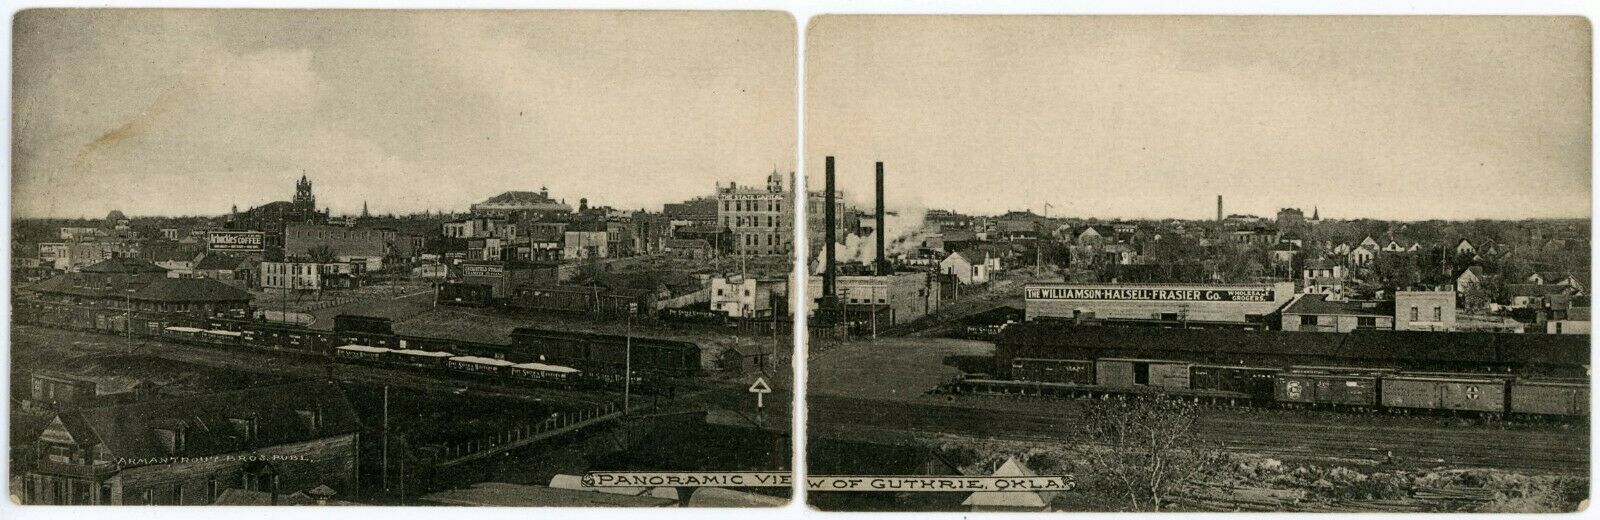 Postcard - Guthrie, Oklahoma Panoramic Double View , Split in Center - C. 1907